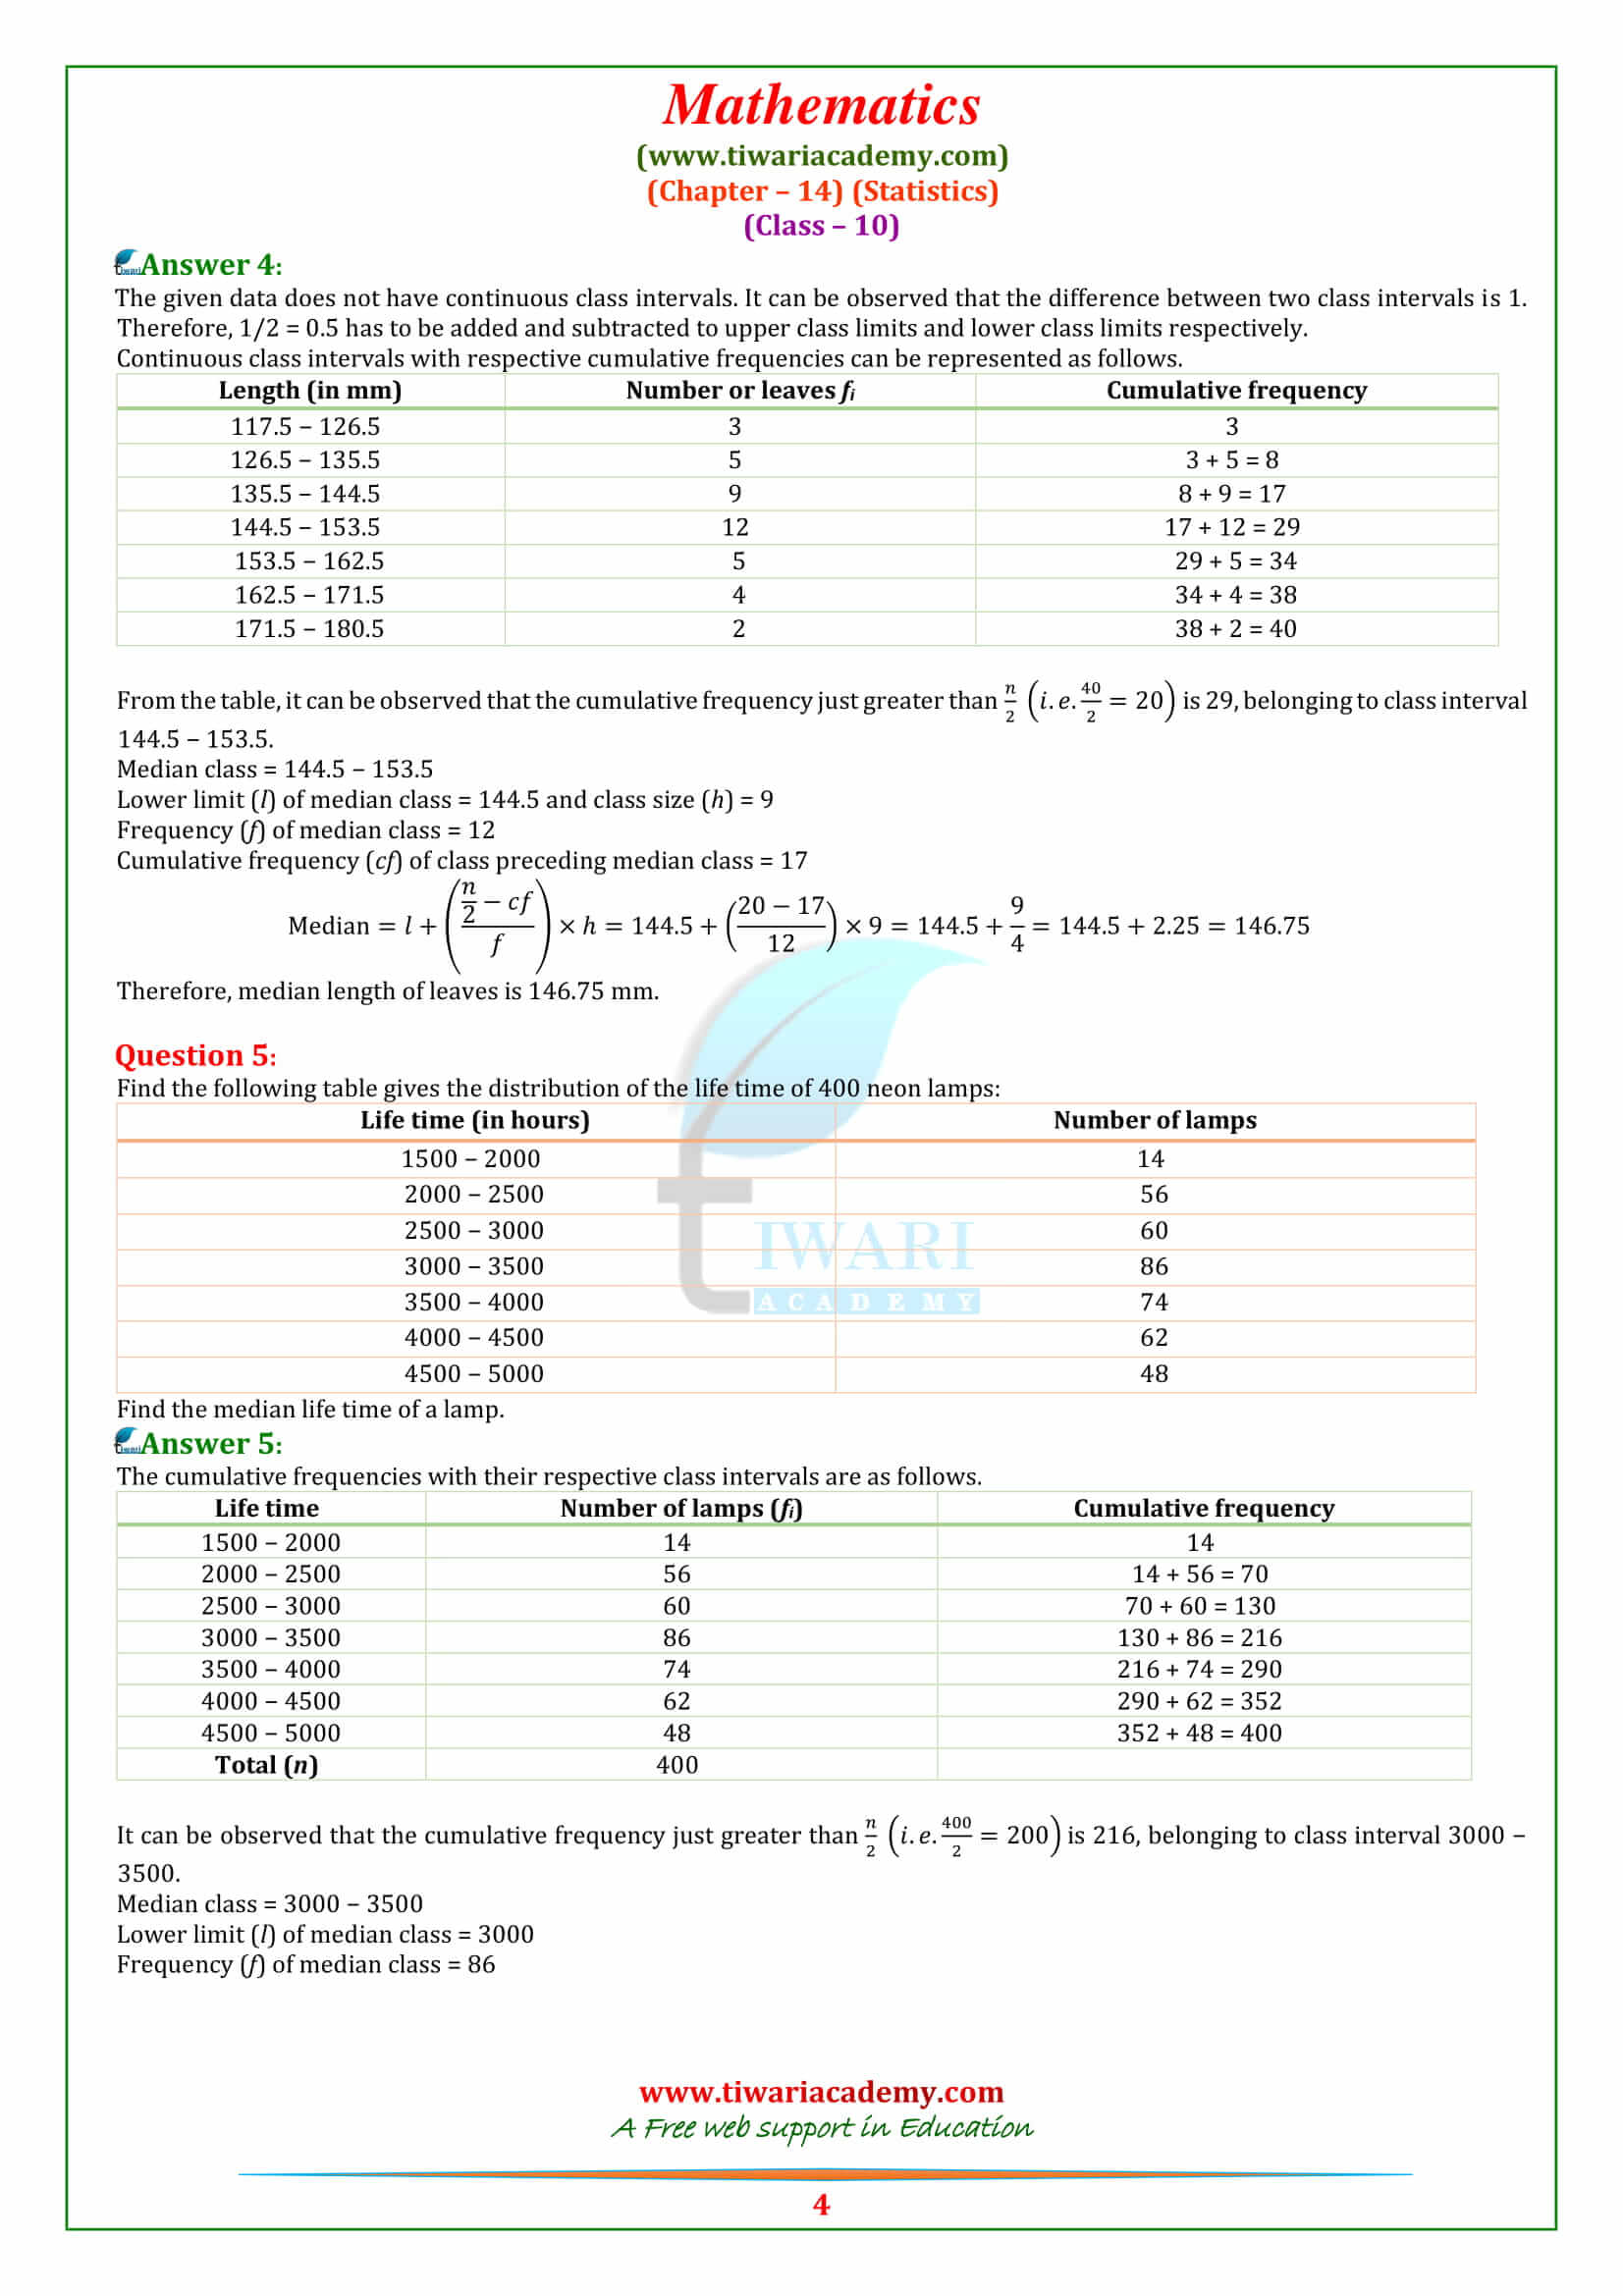 NCERT Solutions for class 10 Maths Chapter 14 Exercise 14.3 all question answers